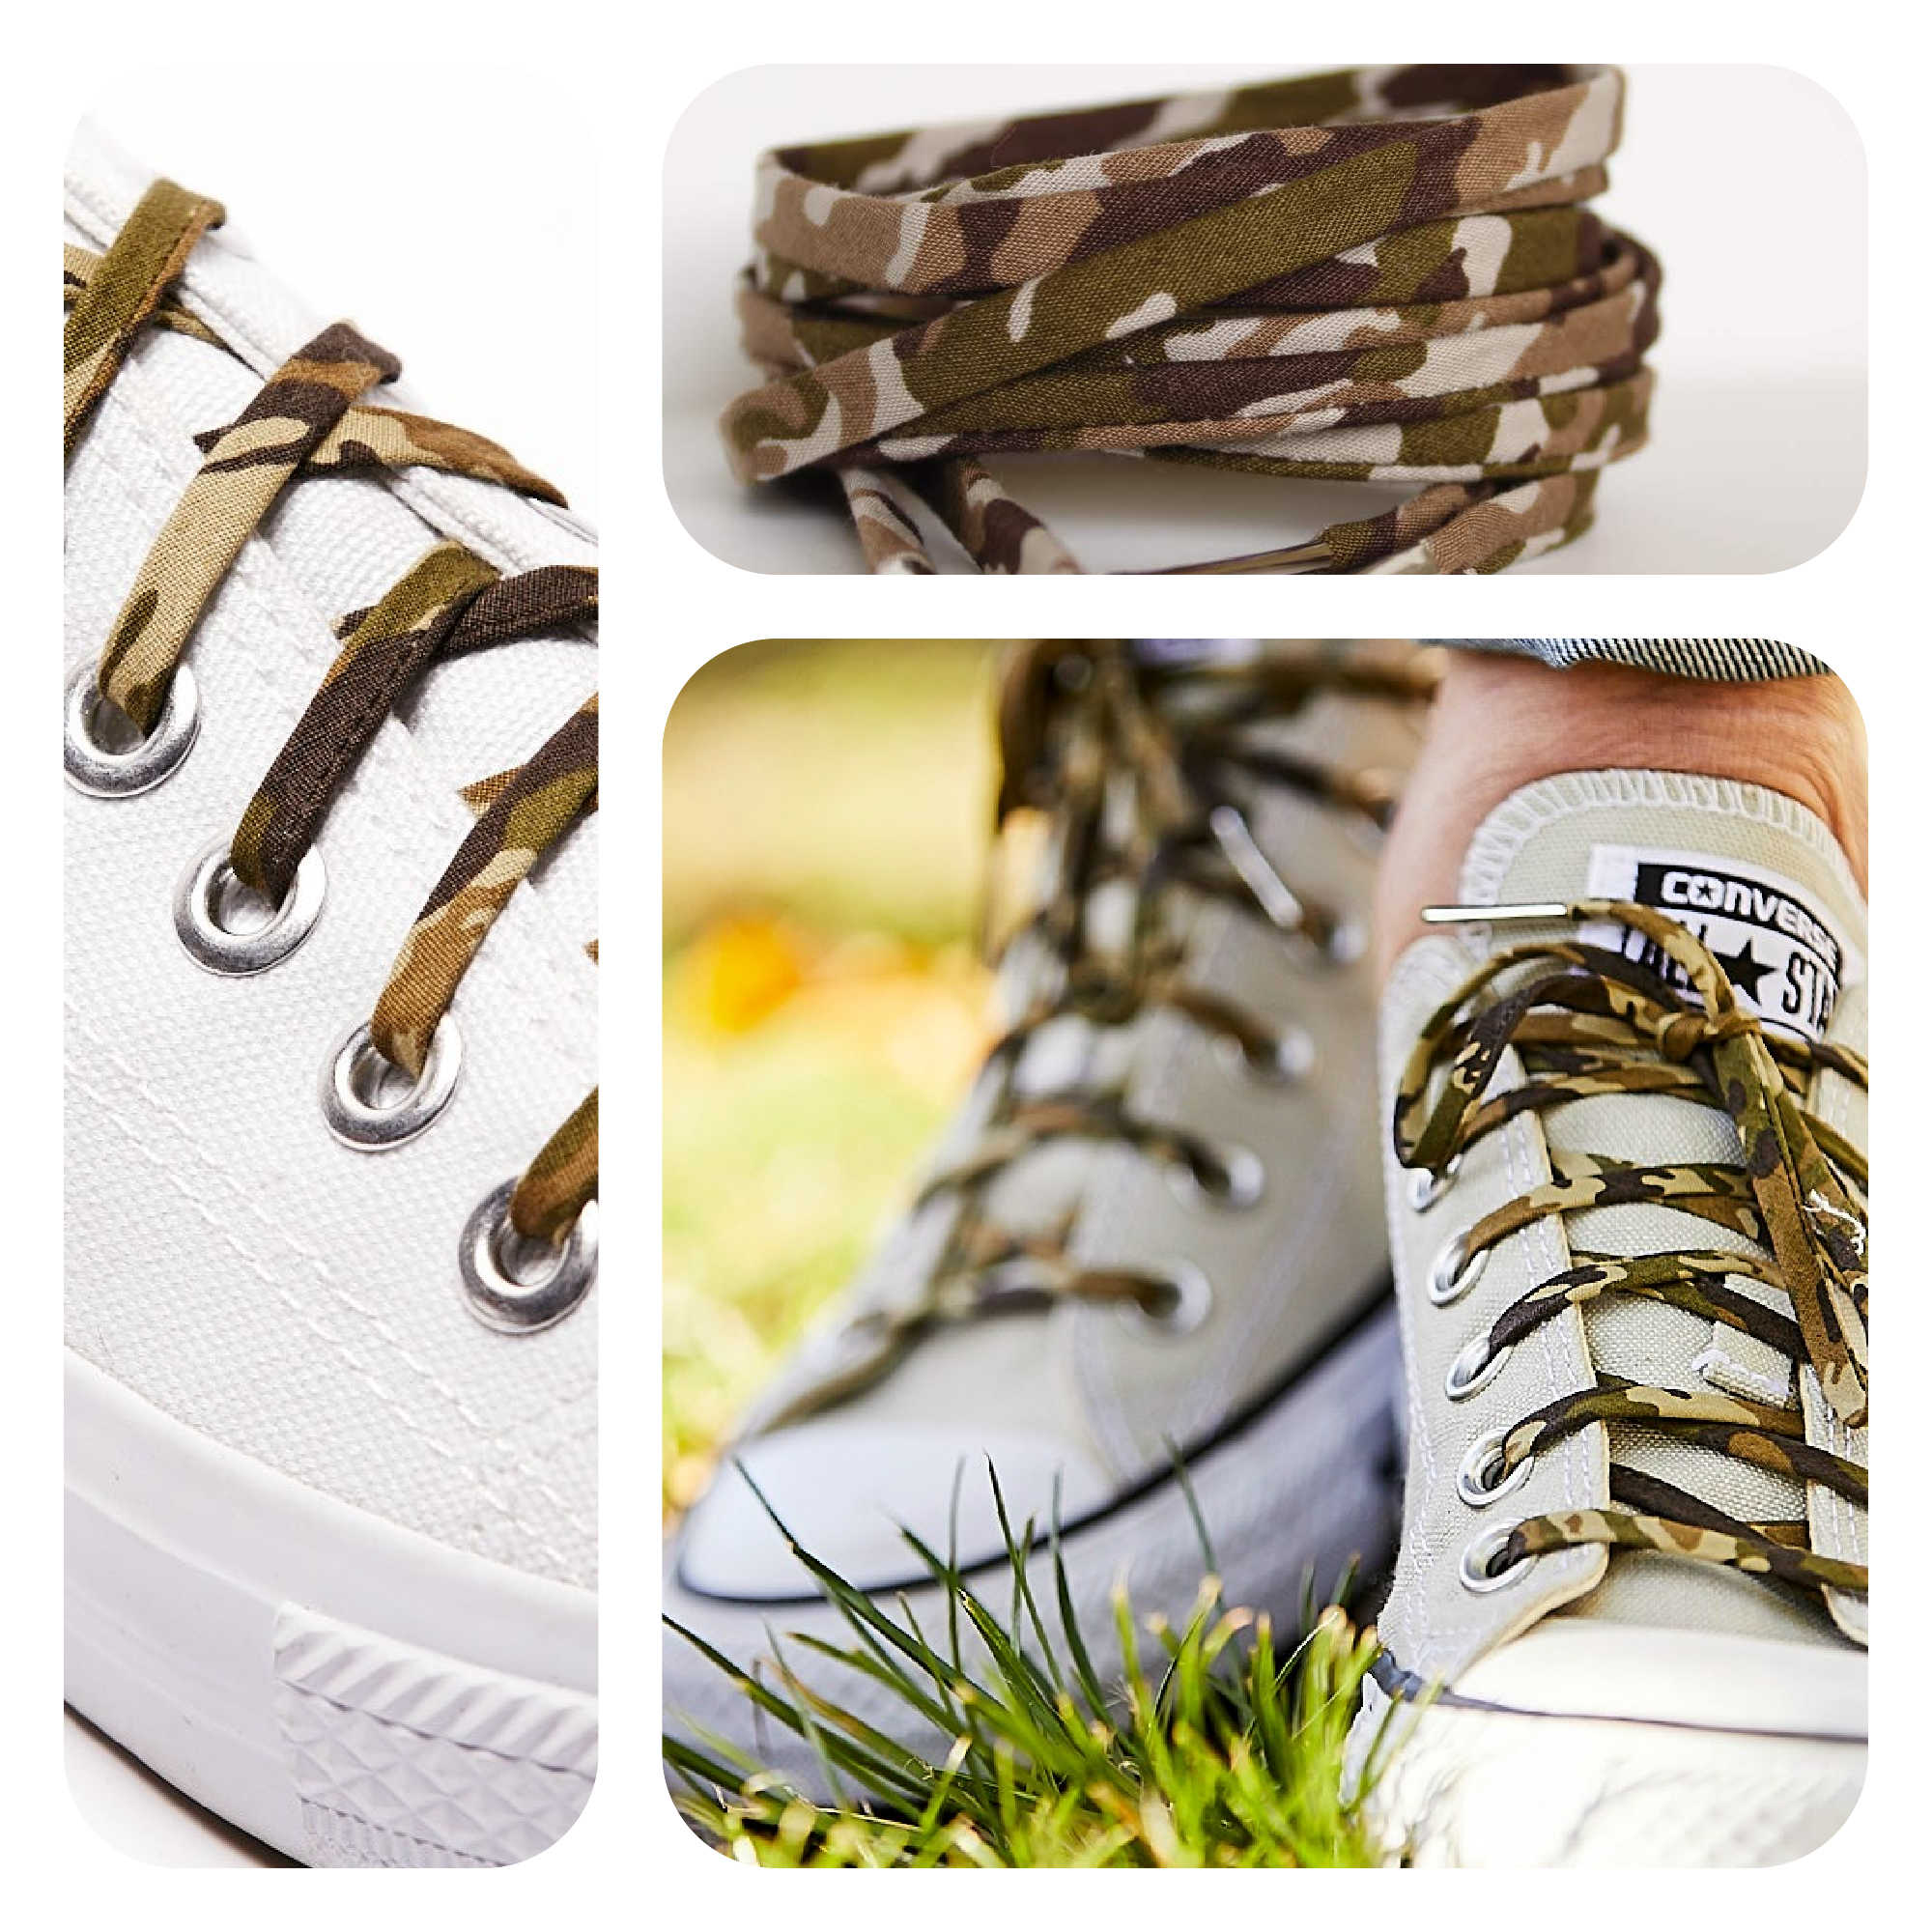 Buy Converse Chuck Taylor All Star Hi Top Tan Camouflage Shoes 1u013 Men's  8/Women's 10 at Amazon.in